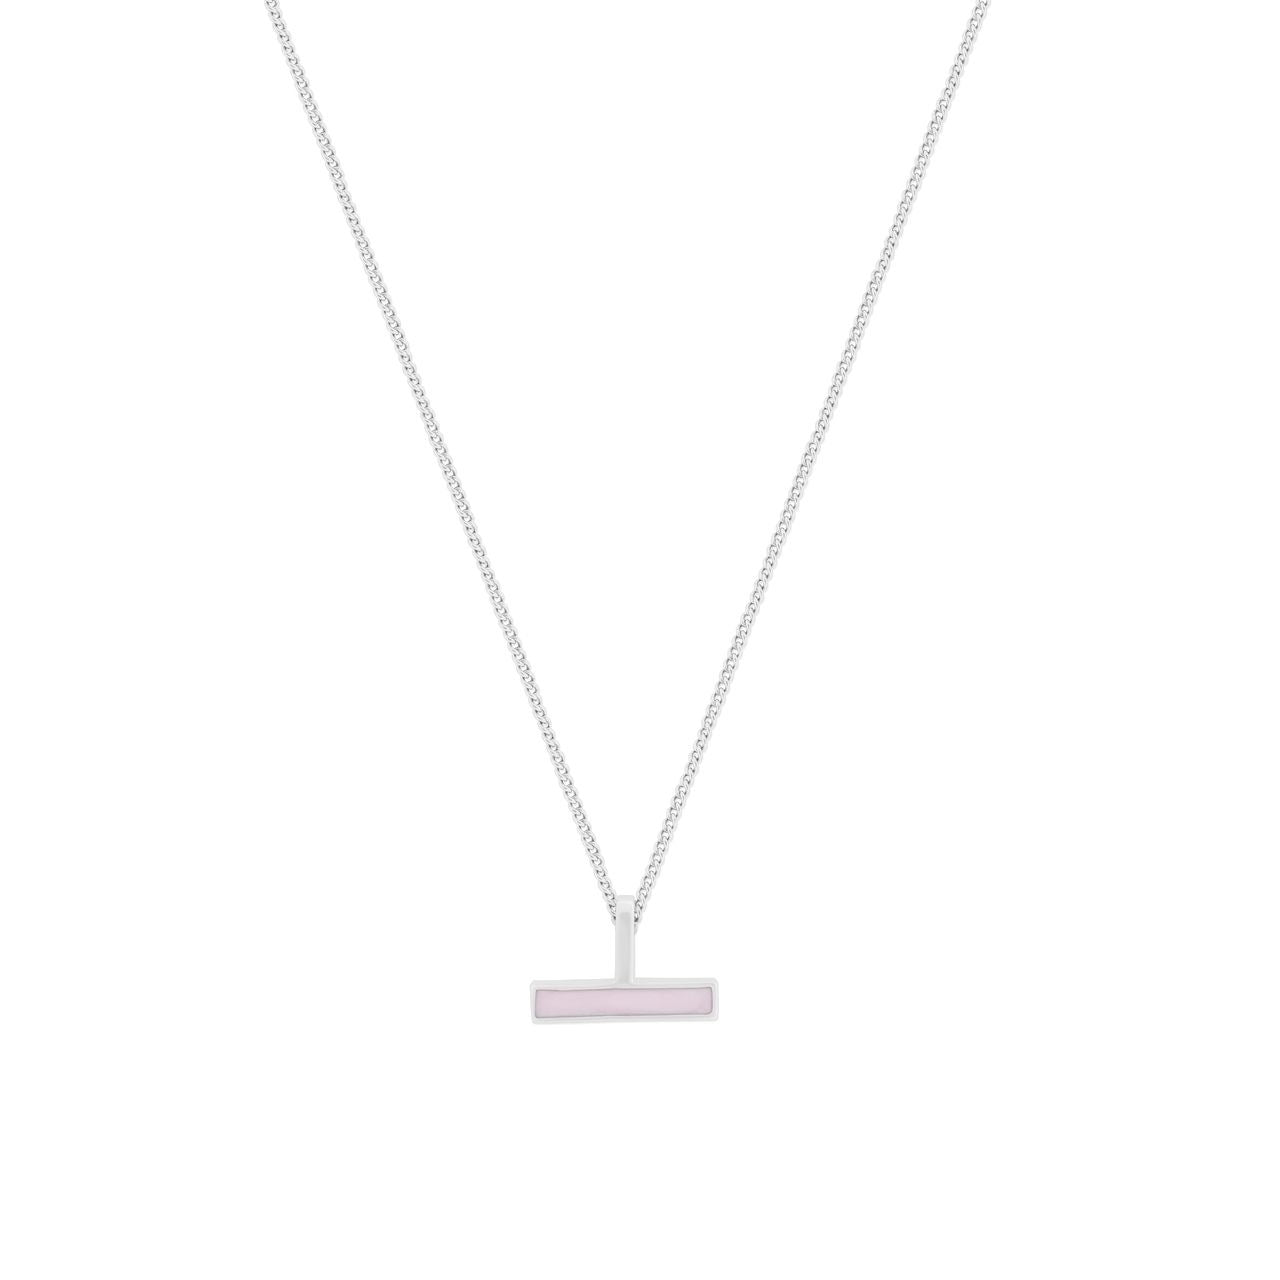 T-Bar Light Pink Enamel Silver Pendant by Tipperary  The Tipperary T-Bar Light Pink Enamel Pendant Silver is the perfect addition to any ensemble. Crafted from durable silver and adorned with beautiful light pink enamel, this pendant is sure to be an eye-catching accent. Show off your unique style with this classic classic piece.